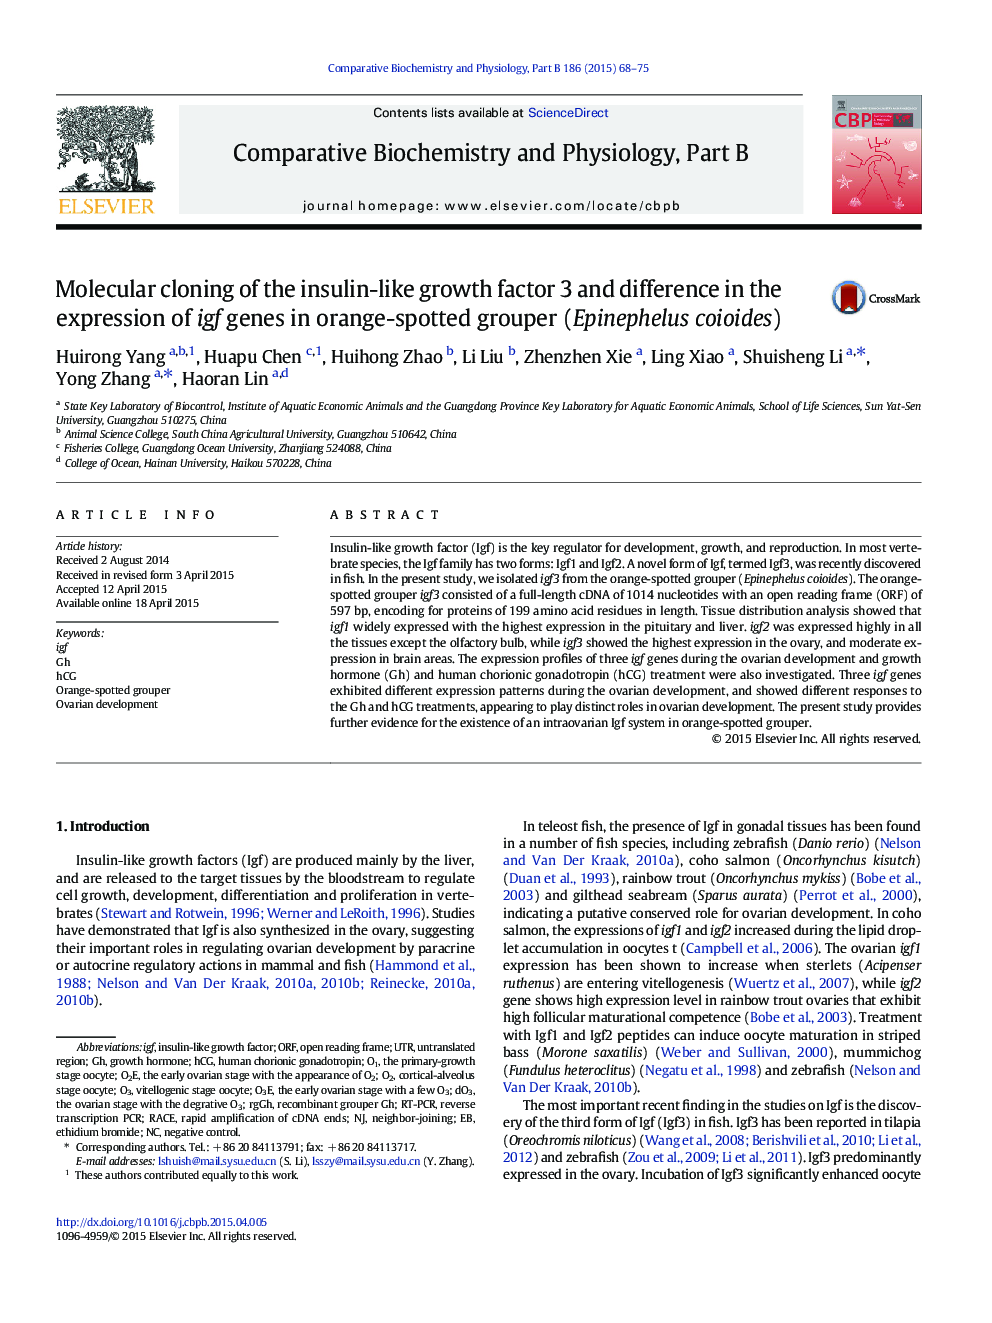 Molecular cloning of the insulin-like growth factor 3 and difference in the expression of igf genes in orange-spotted grouper (Epinephelus coioides)